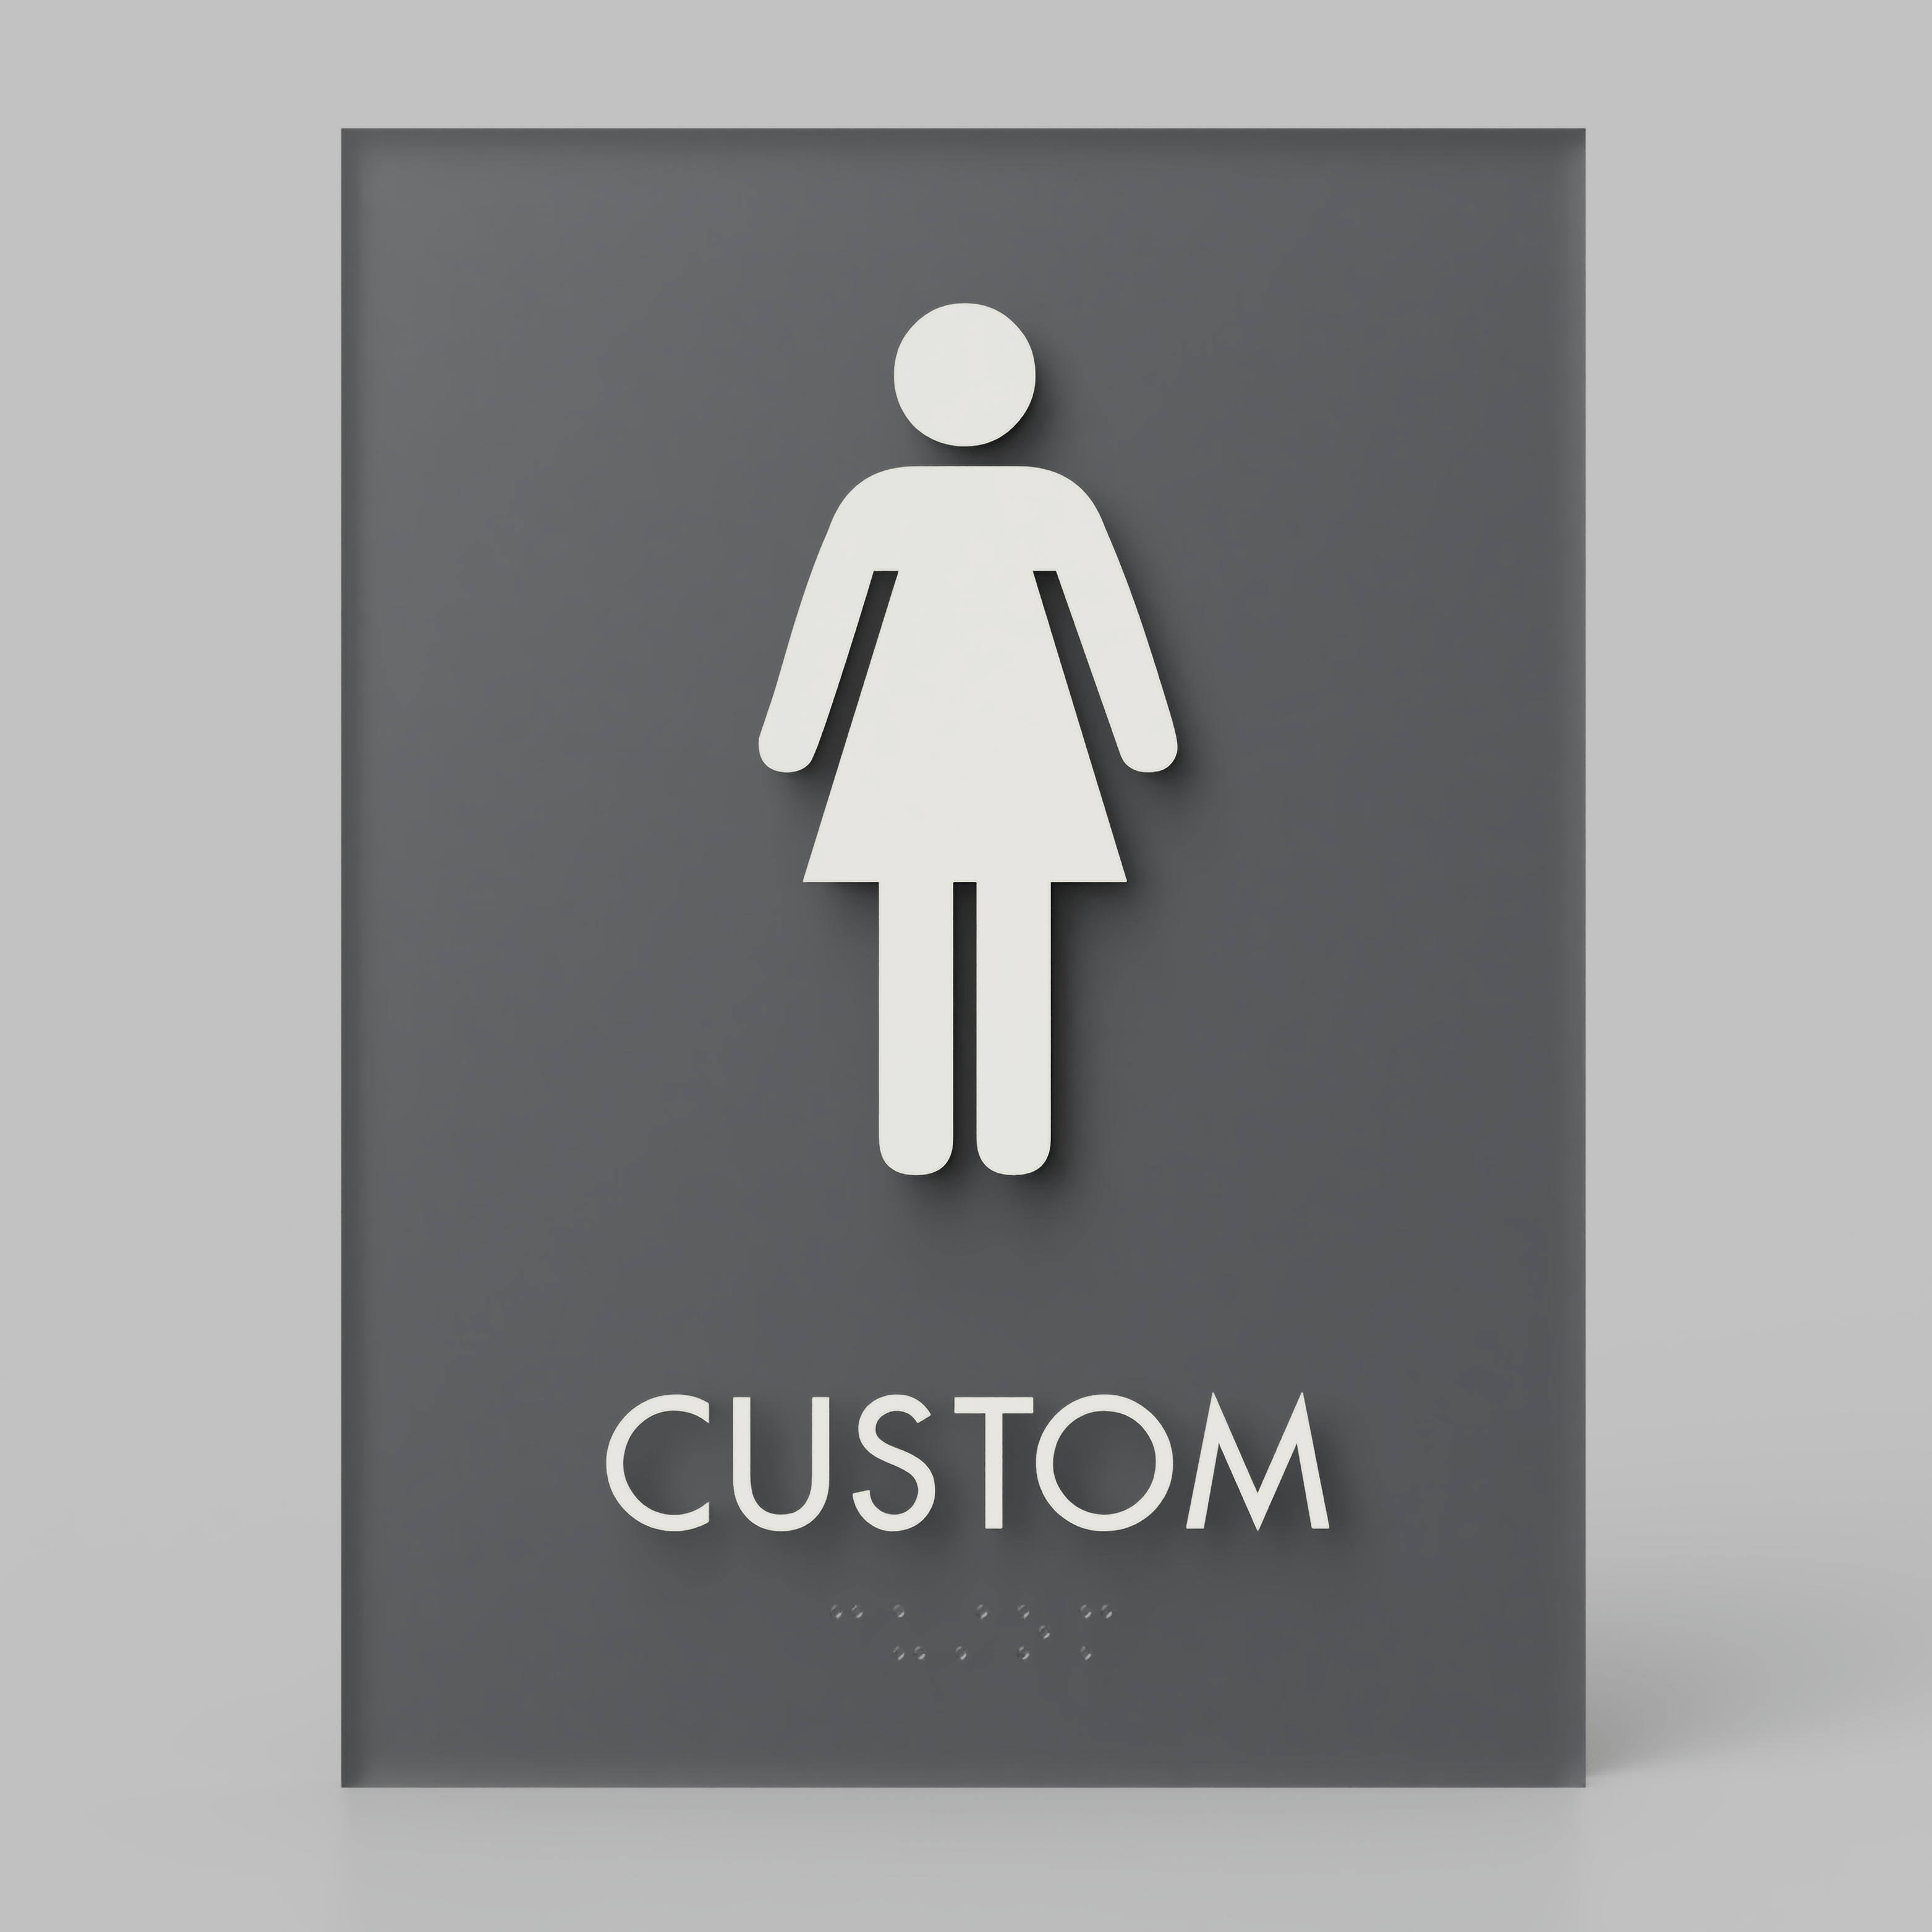 Harper Laine Shop Tier 1 - Acrylic Cool Gray / 1/4" / Women Restroom ID A, Customizable 1 Line Text, 6″ x 8″, ADA, Reese Series